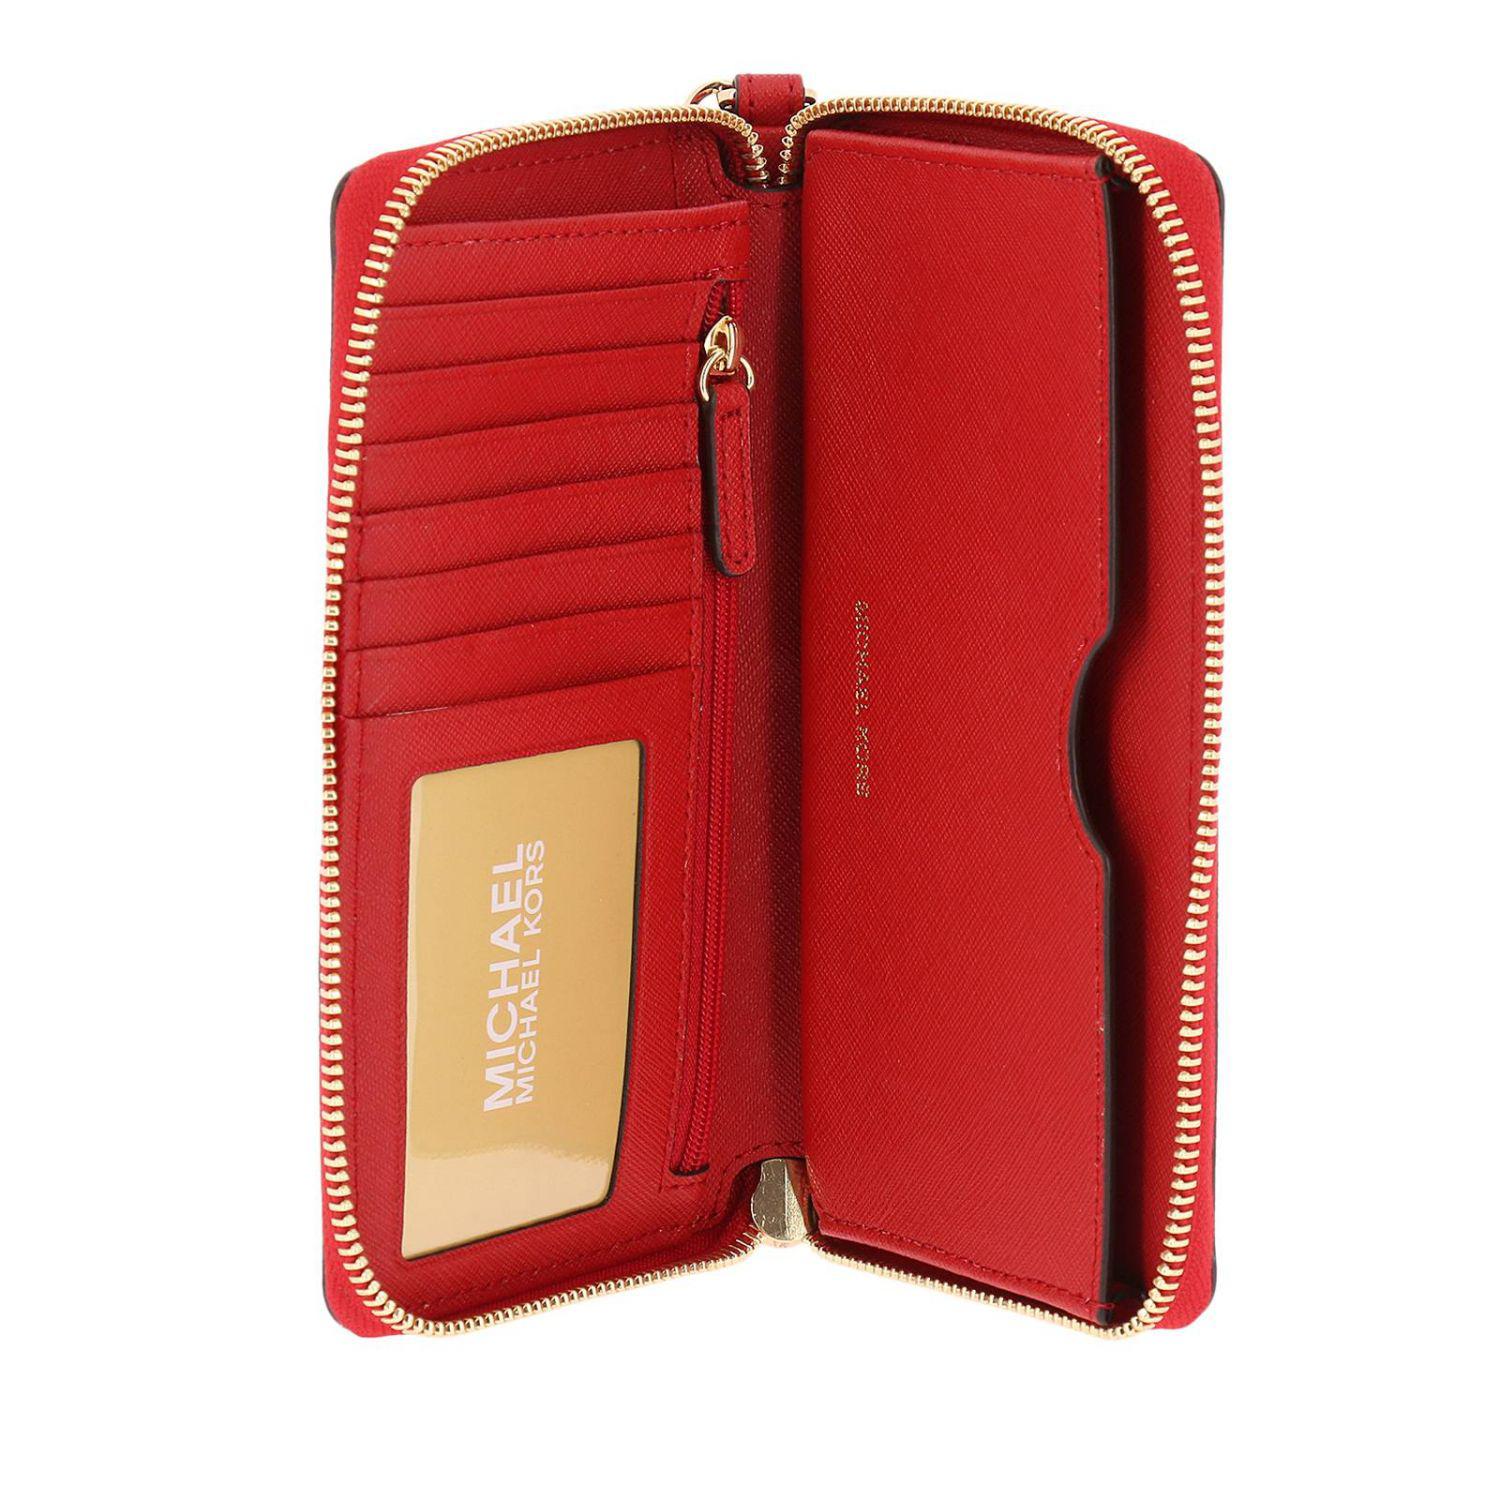 How Much Is The Michael Kors Wallet In The Philippines - Best Design Idea